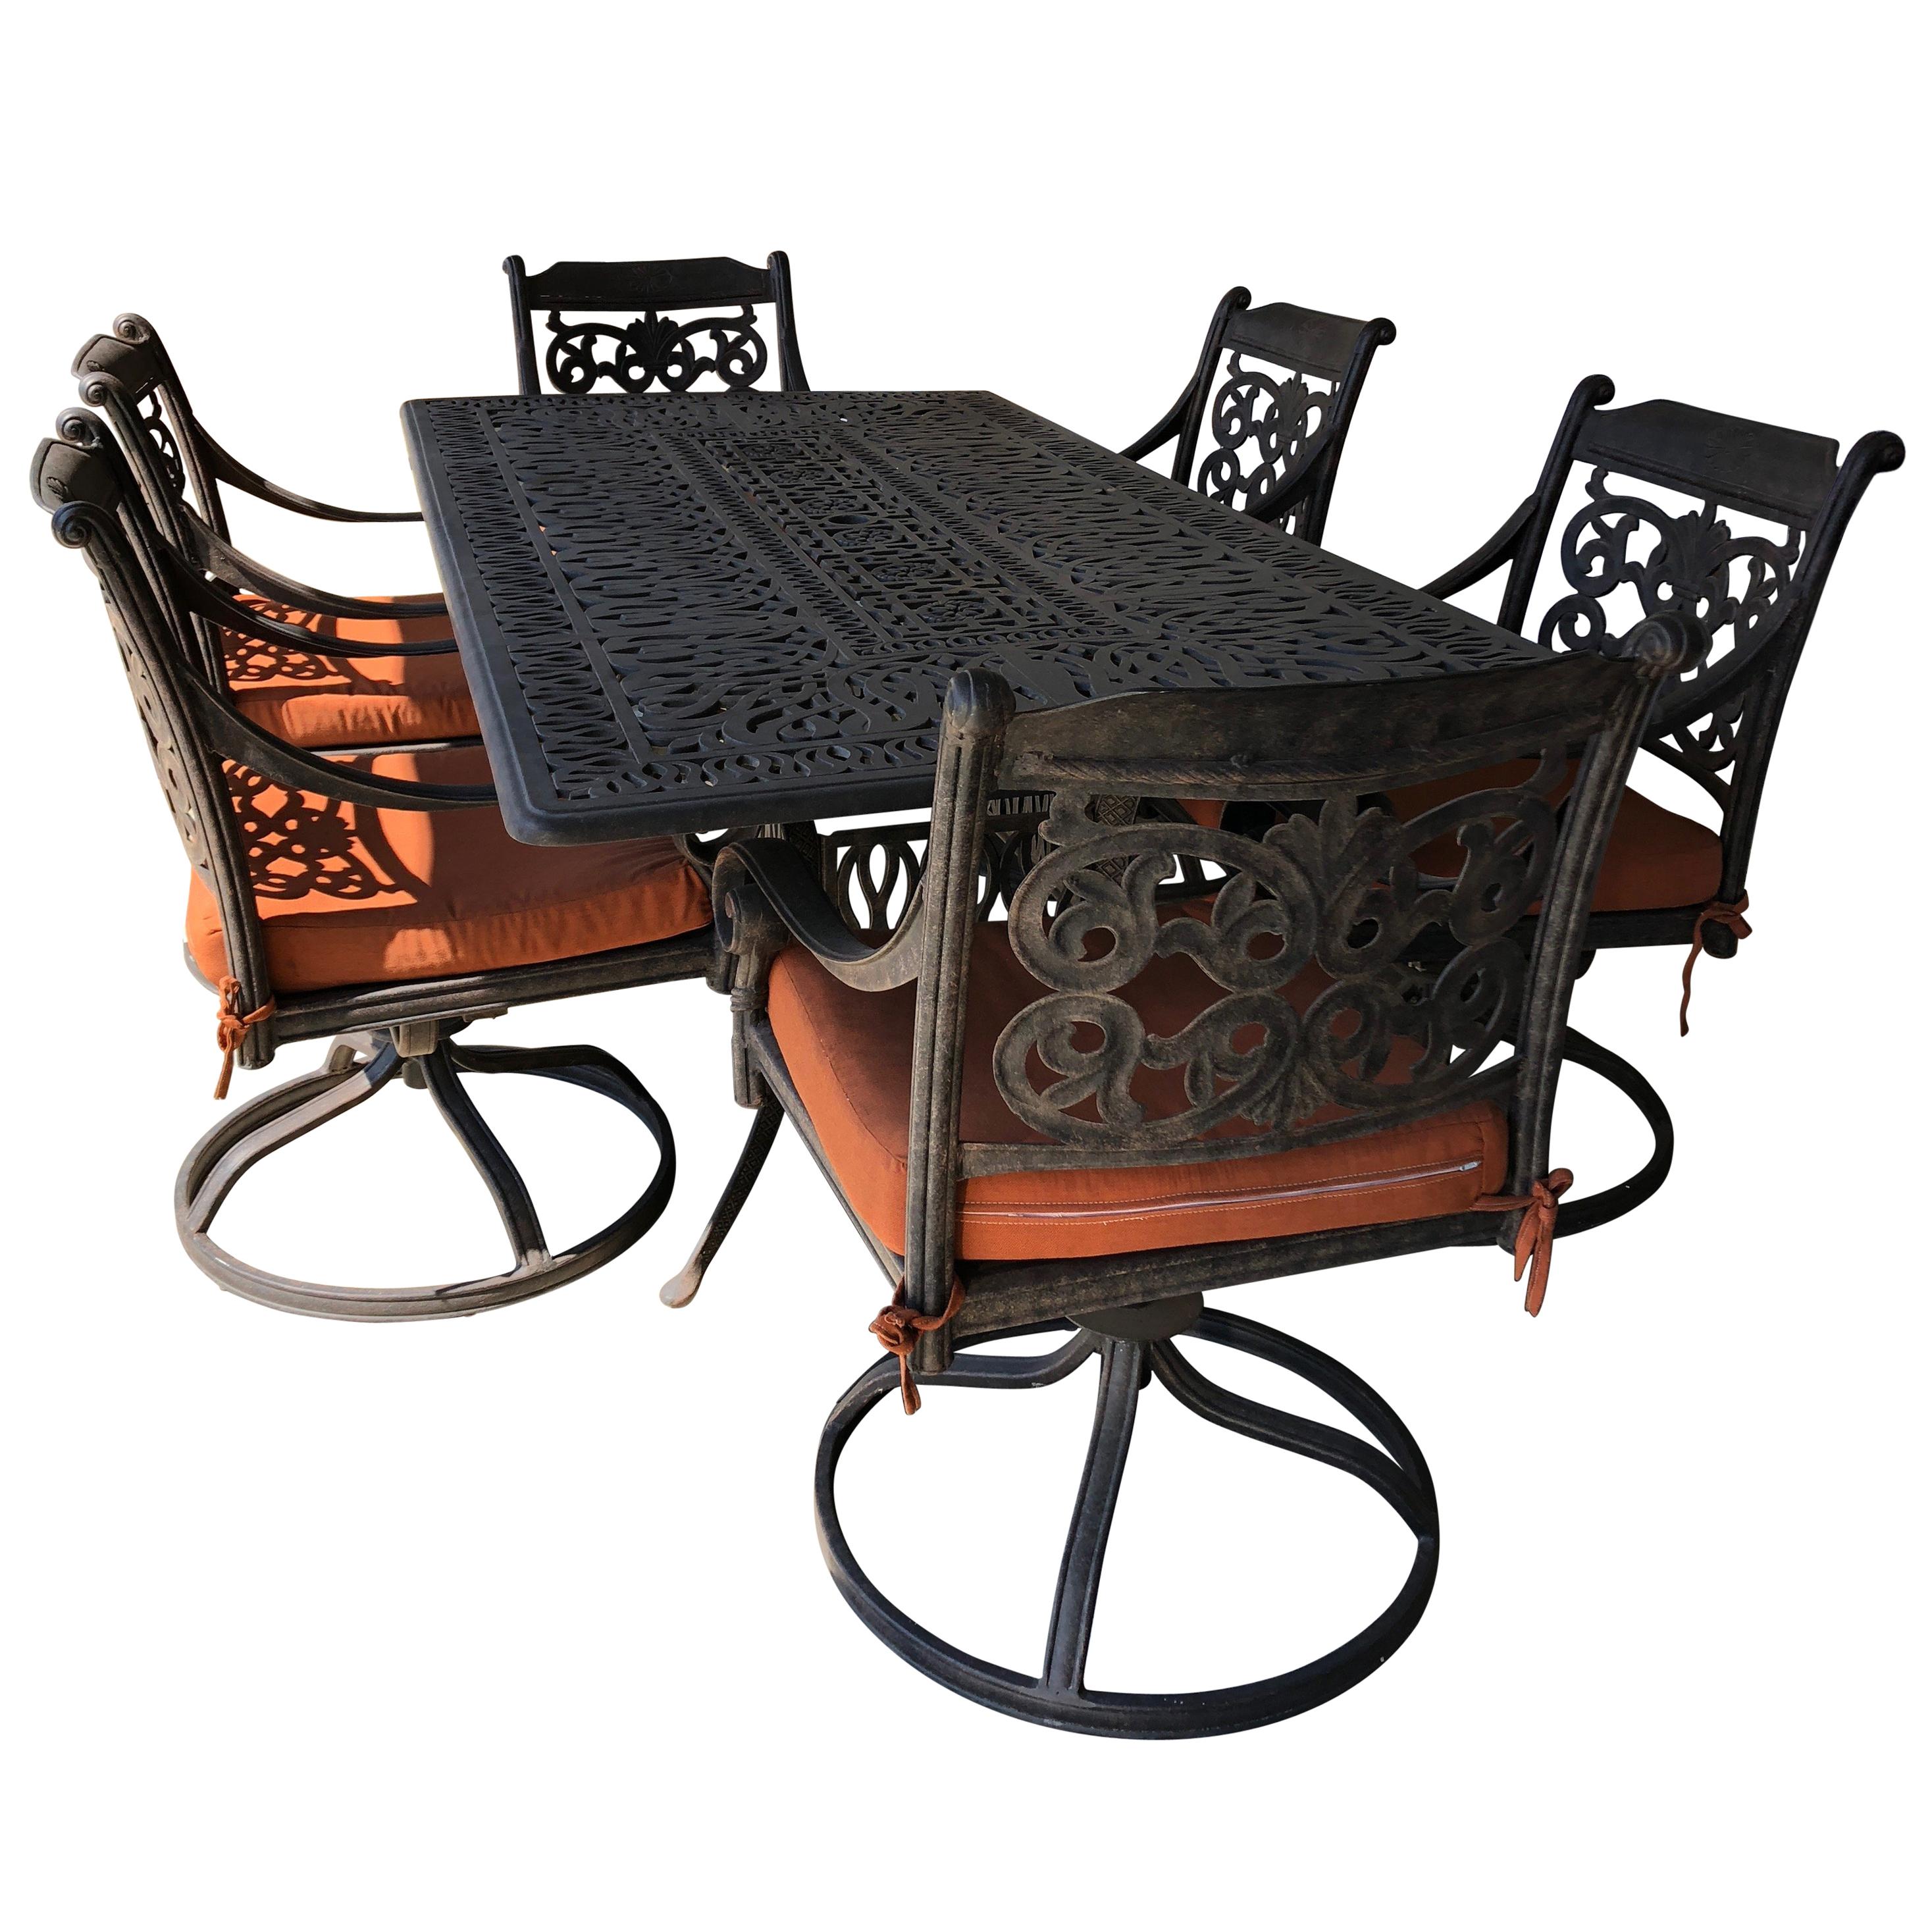 Let's Have a Party Large Cast Aluminum Patio Dining Table and 6 Armchairs